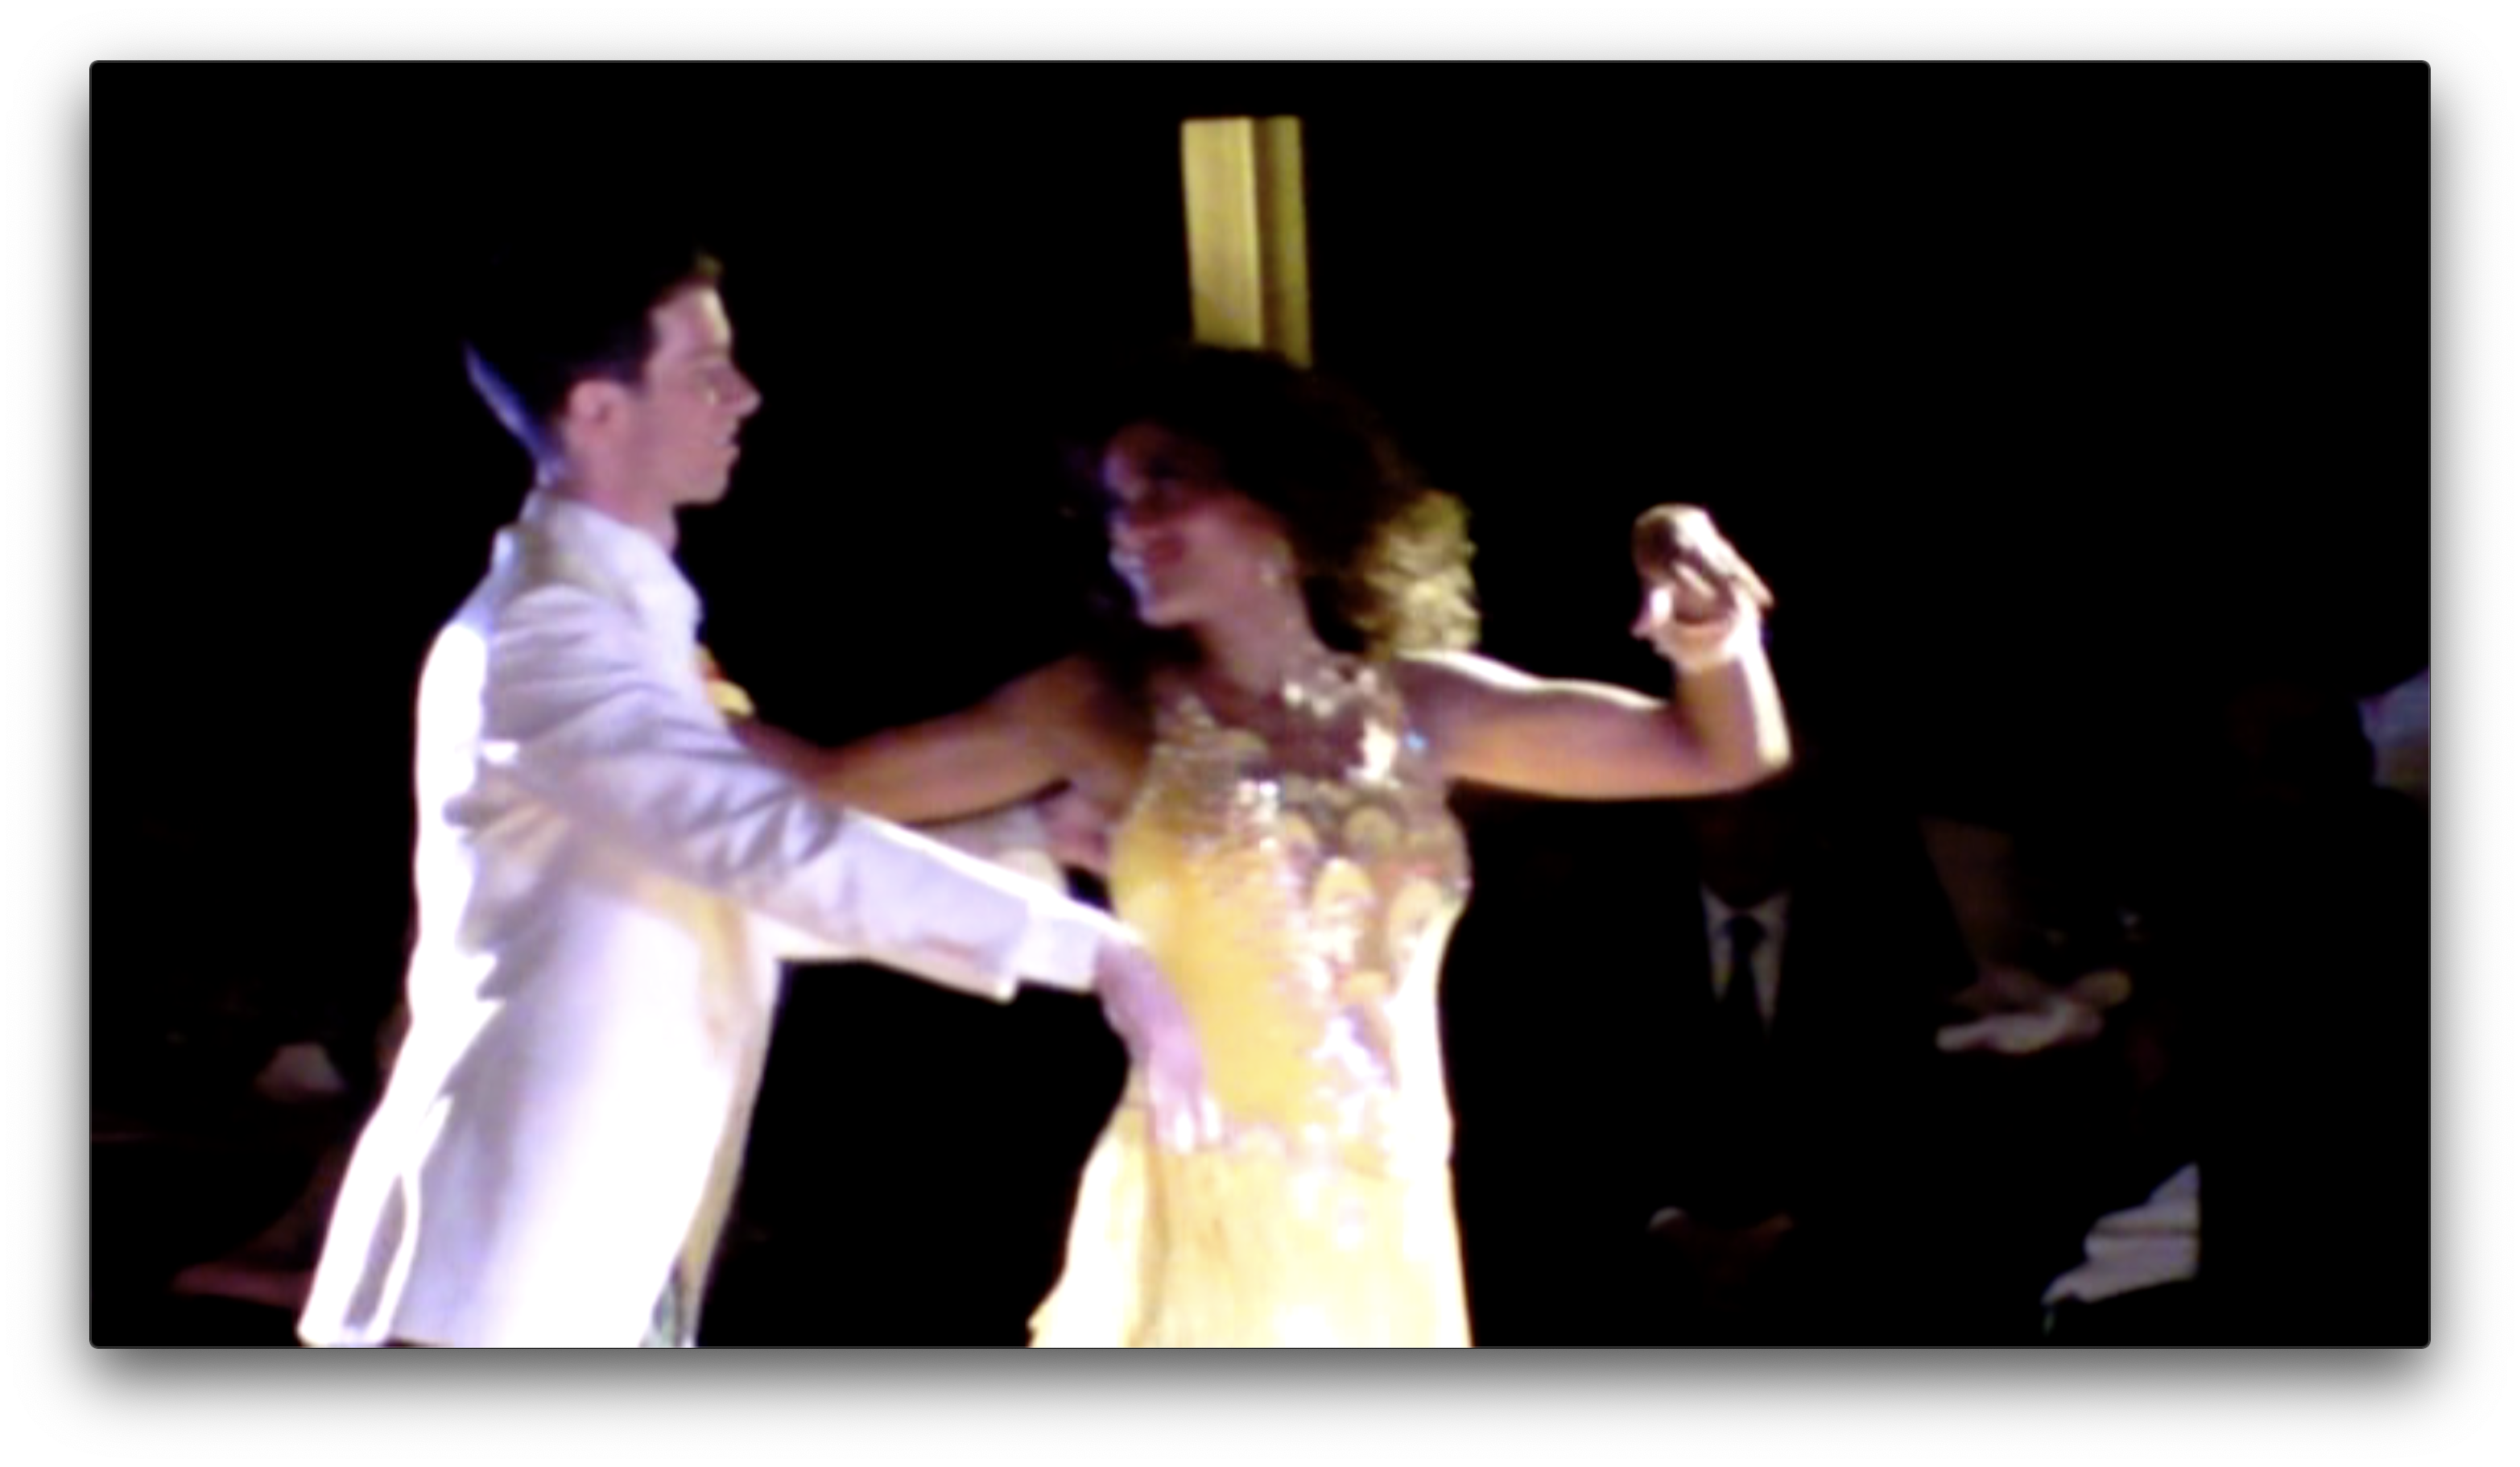 Grisel Carrano and Piers : Salsa